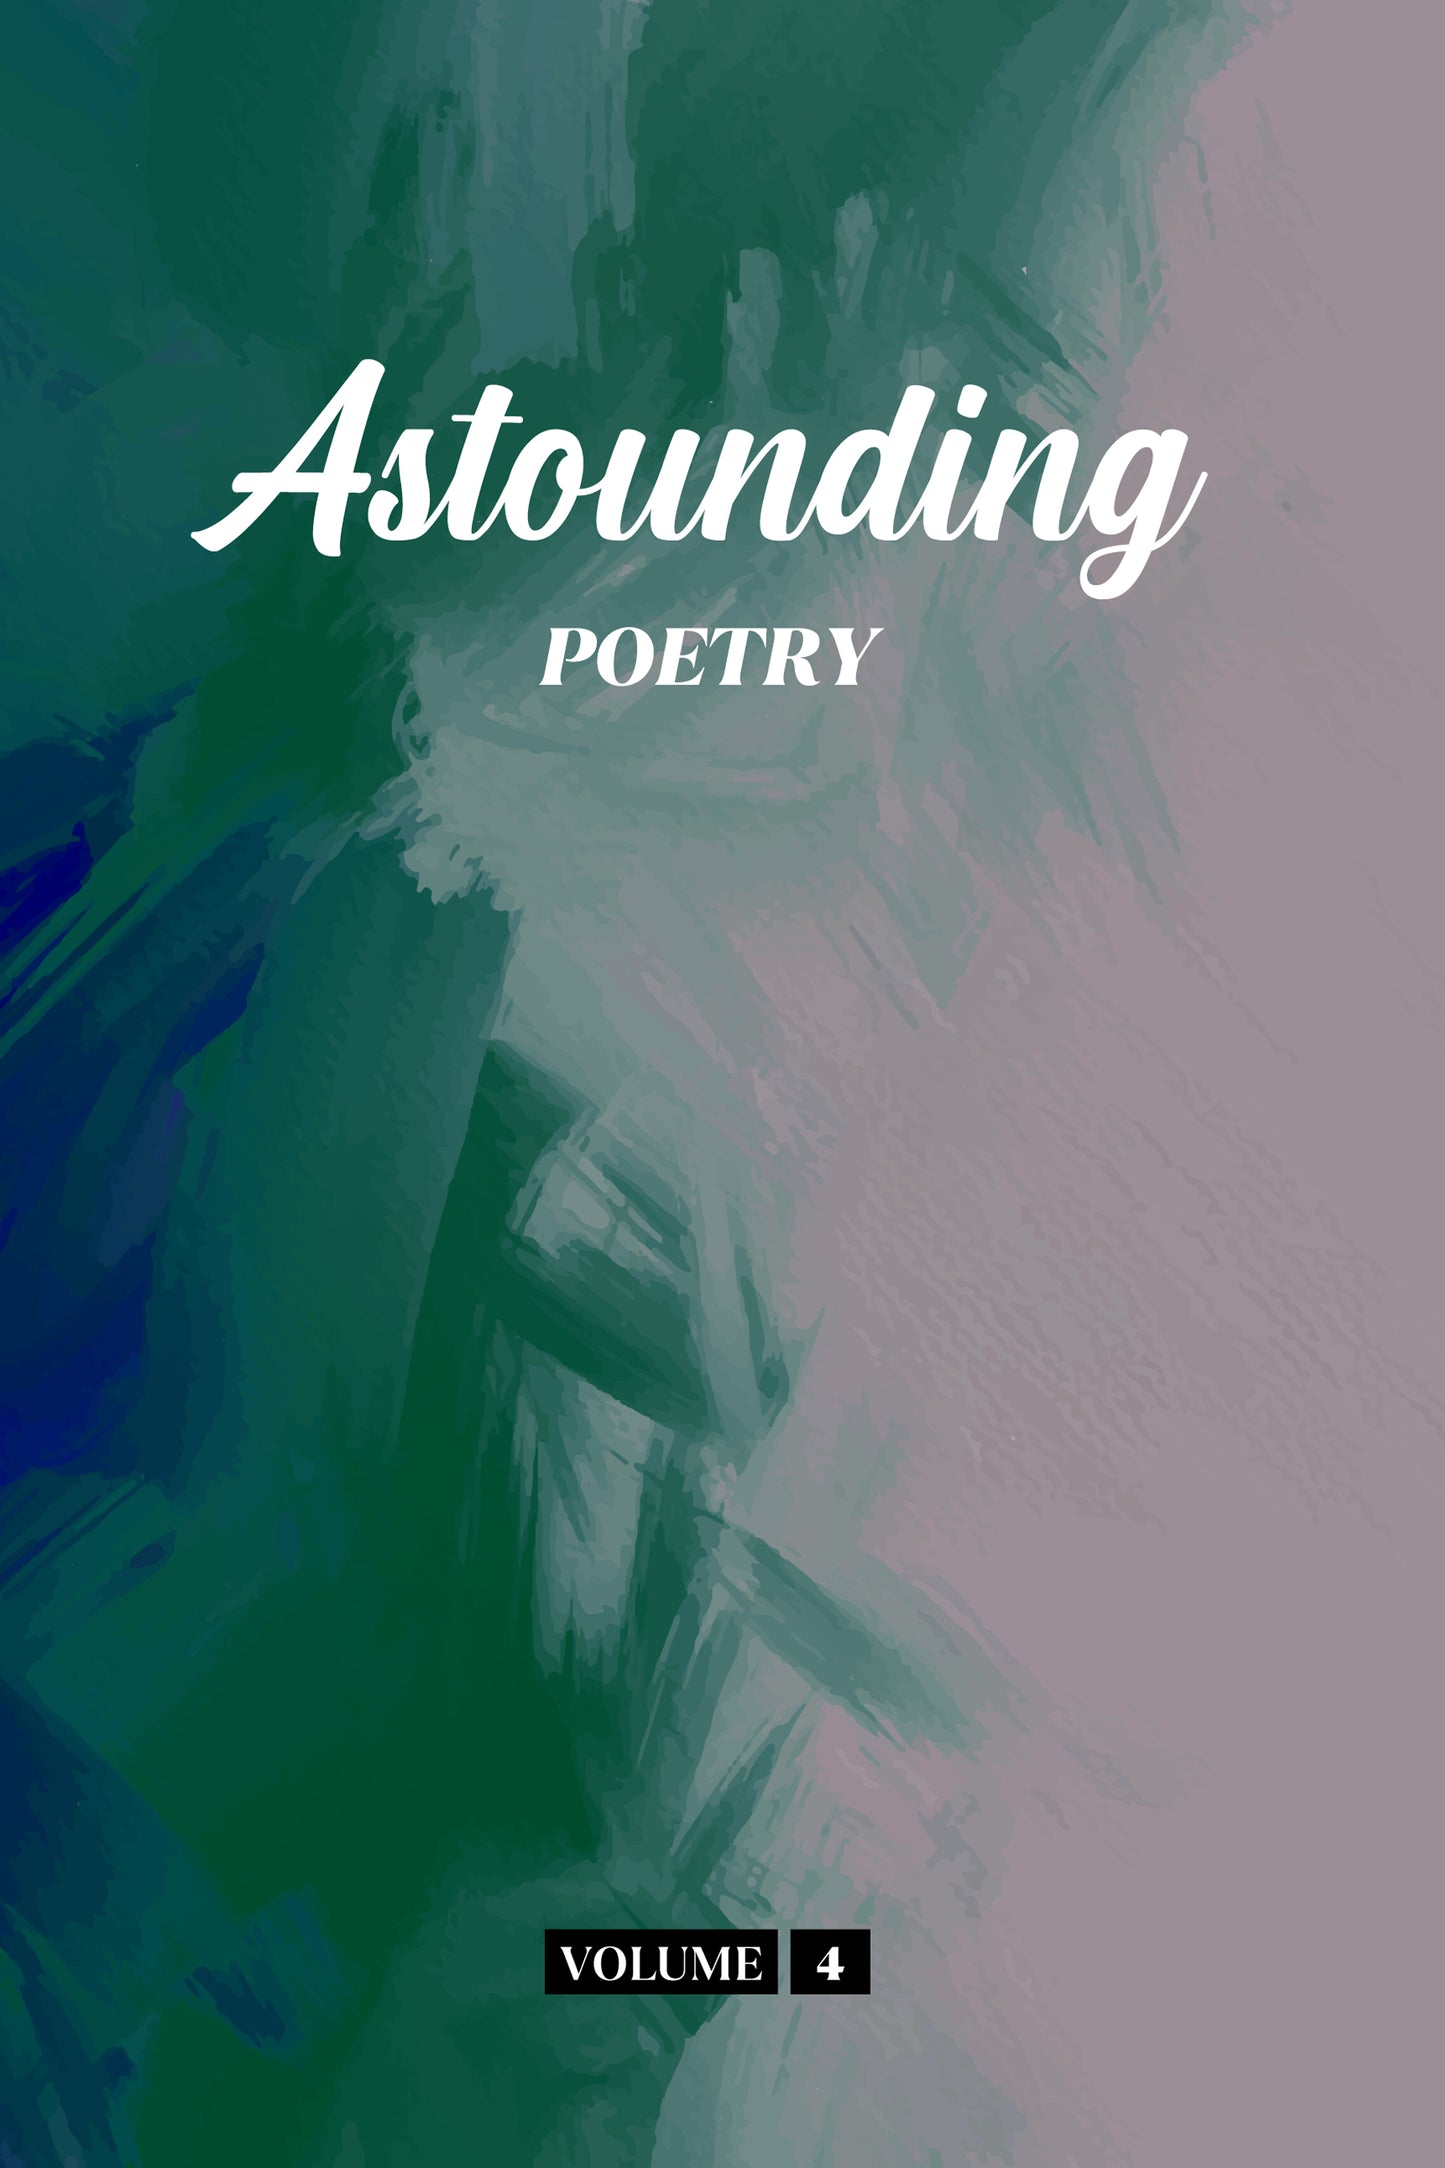 Astounding Poetry (Volume 4) - Physical Book